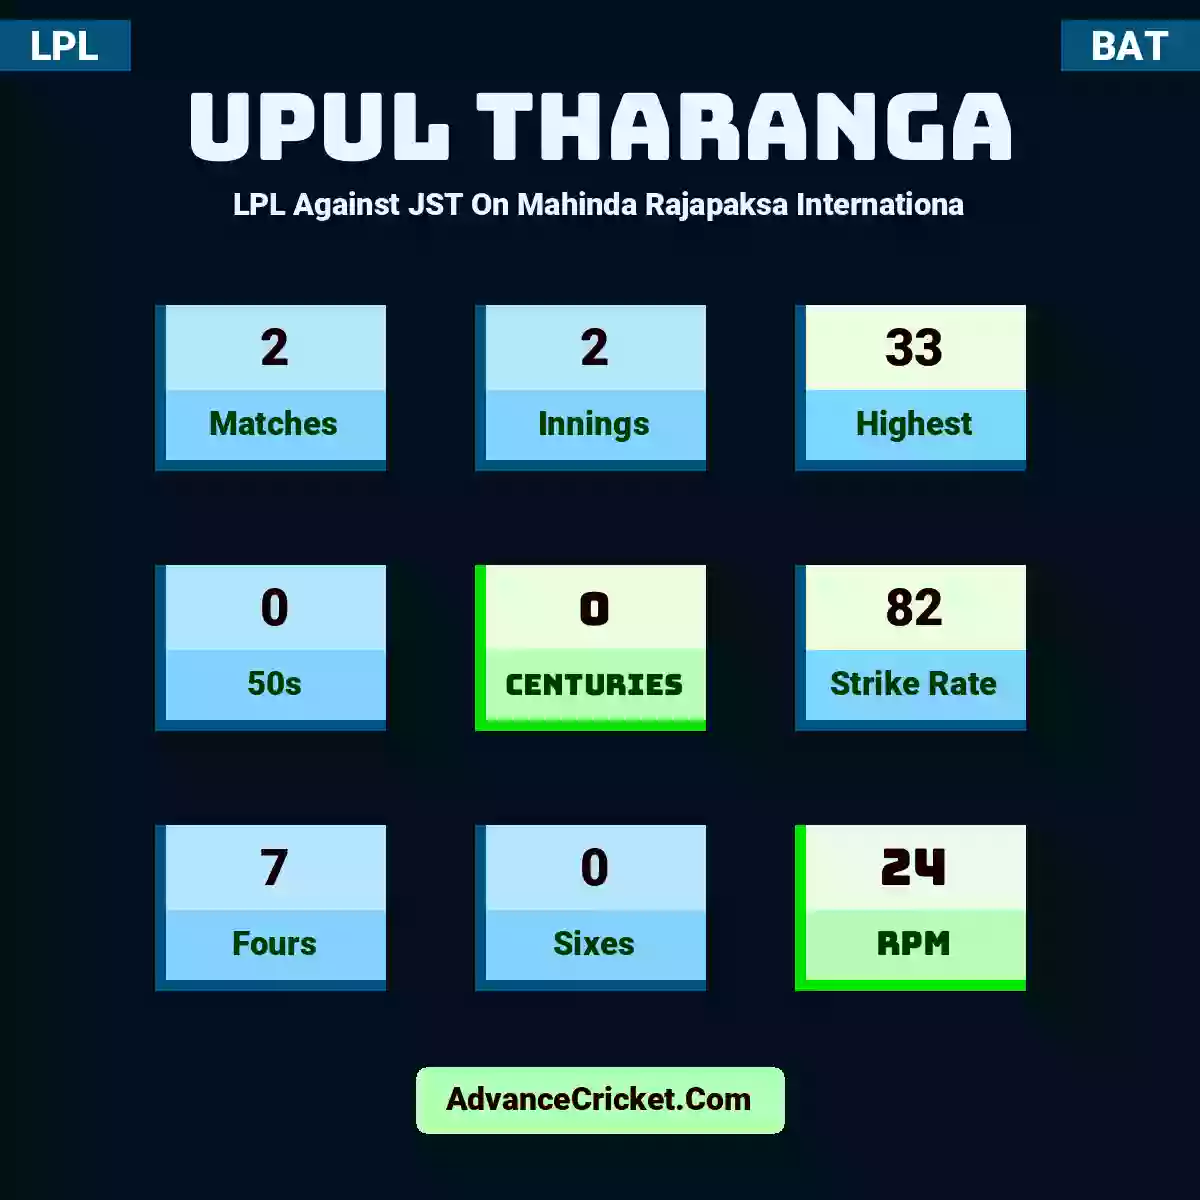 Upul Tharanga LPL  Against JST On Mahinda Rajapaksa Internationa, Upul Tharanga played 2 matches, scored 33 runs as highest, 0 half-centuries, and 0 centuries, with a strike rate of 82. U.Tharanga hit 7 fours and 0 sixes, with an RPM of 24.